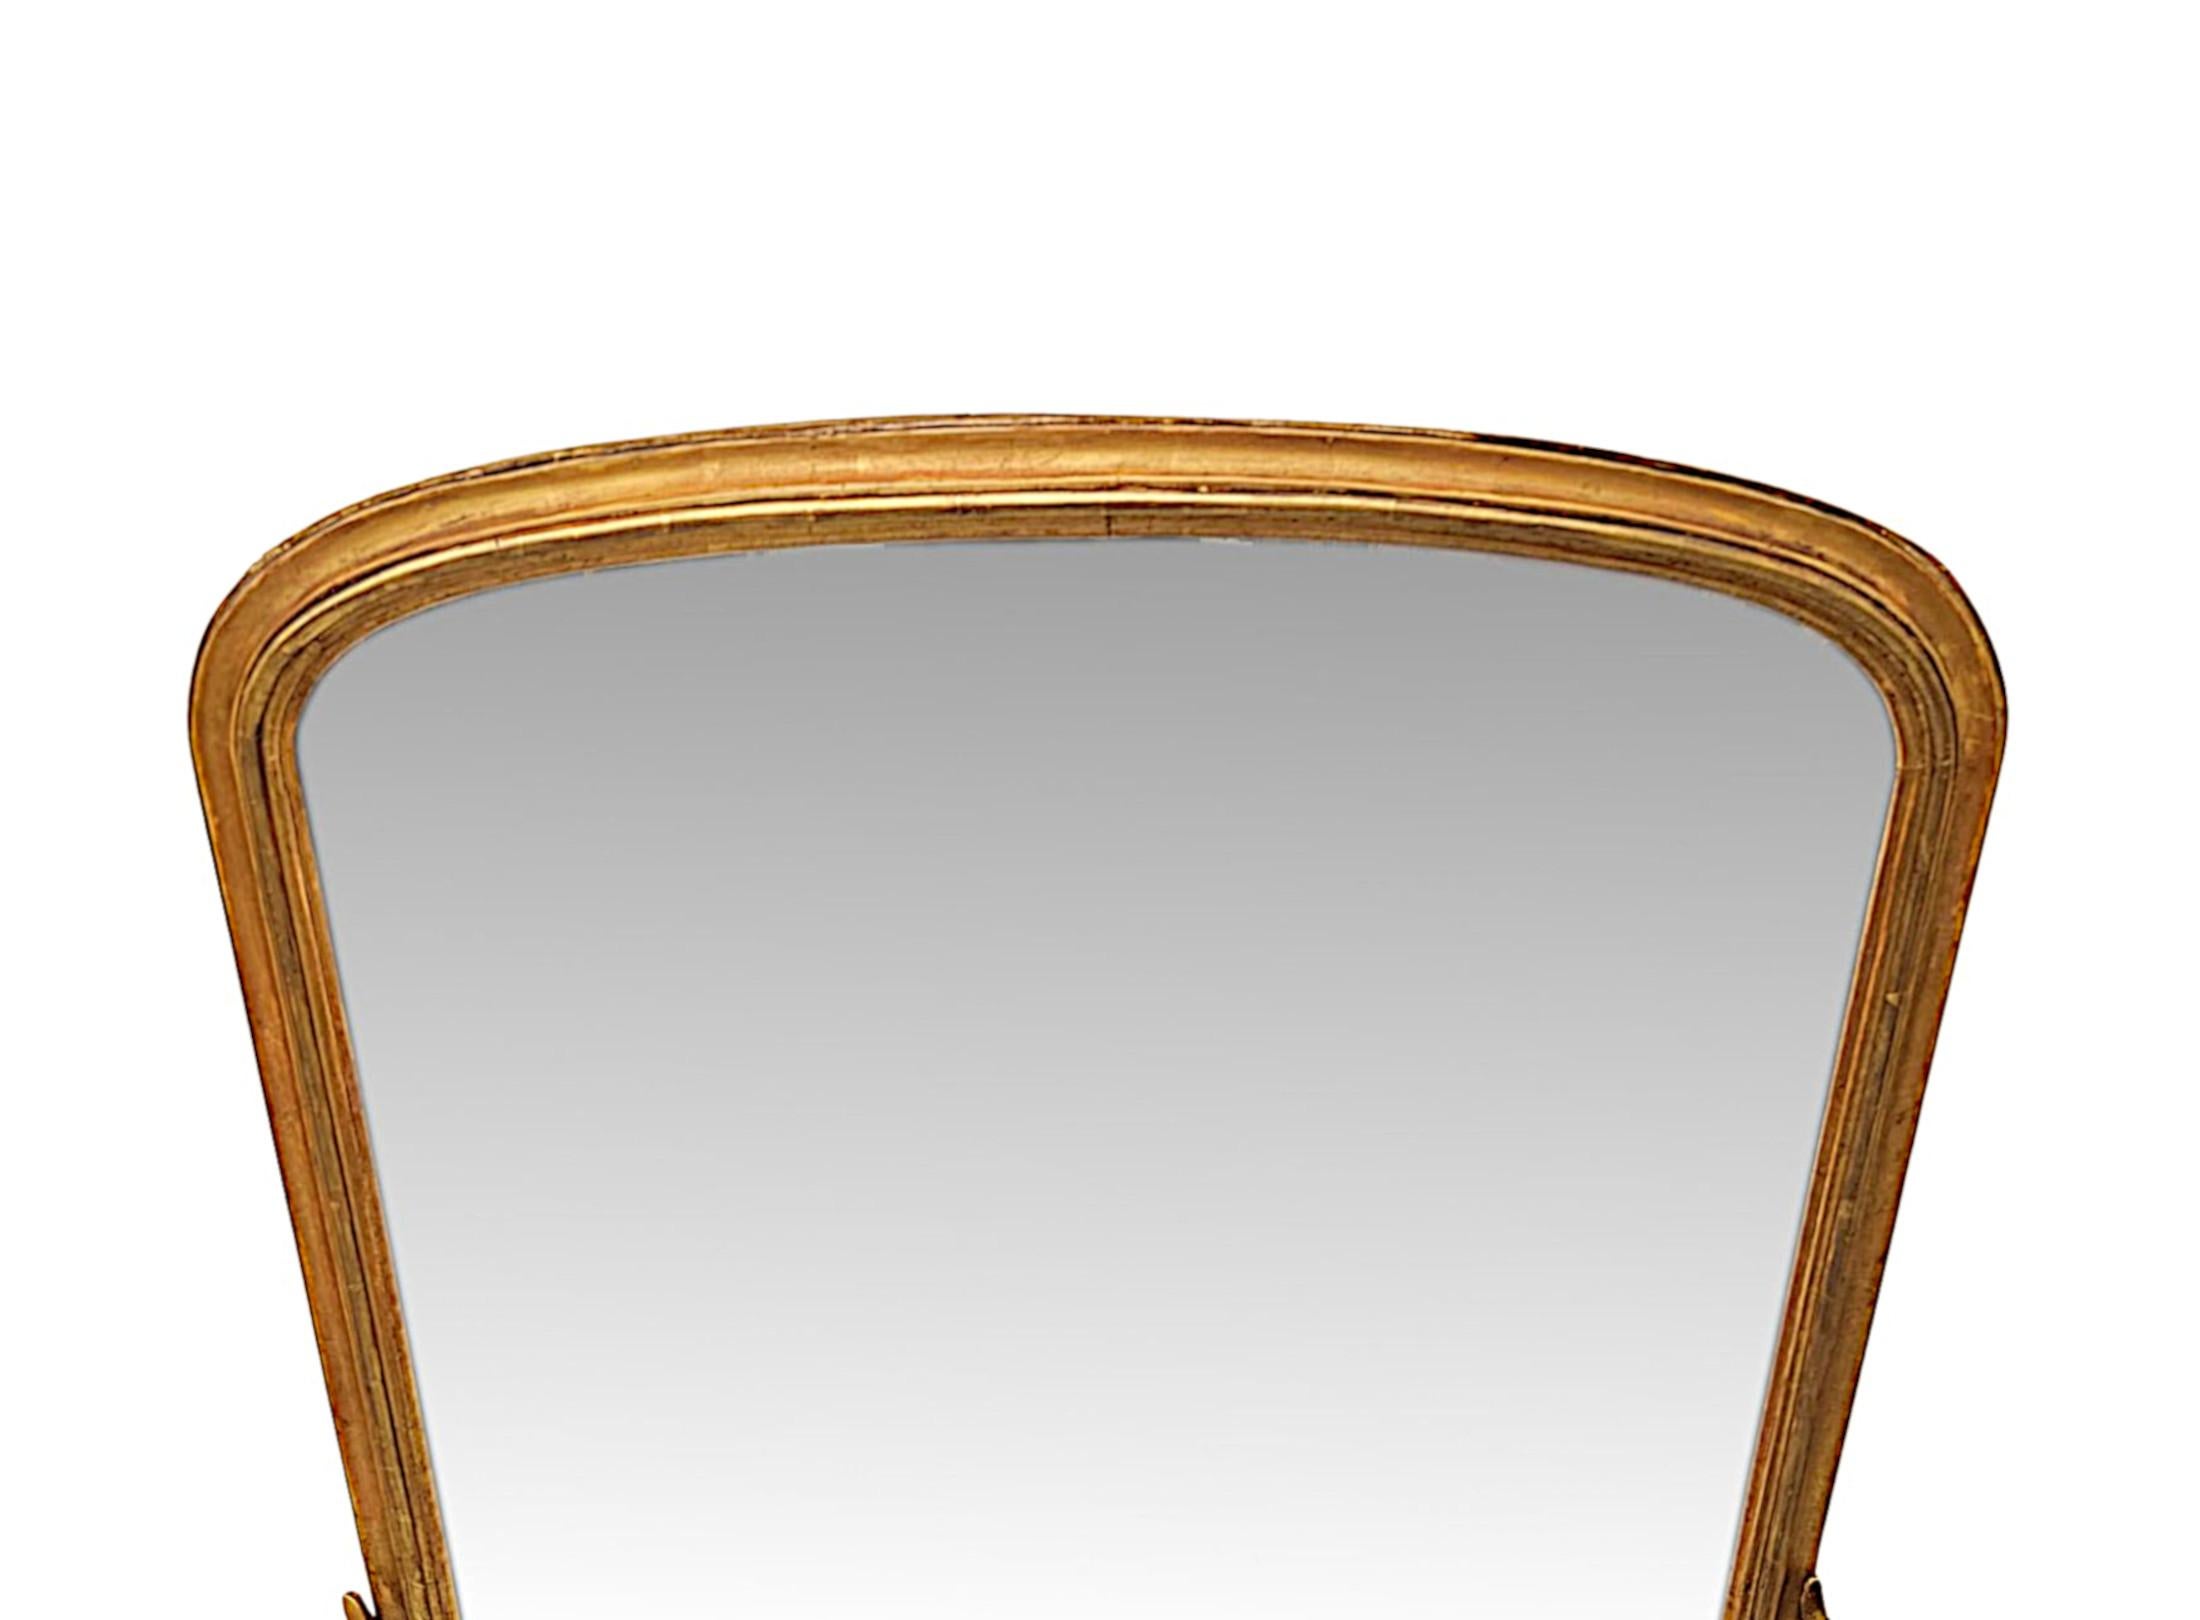 A fabulous 19th Century giltwood archtop overmantel mirror of neat proportions and exceptional quality.  The shaped mirror glass plate is set within a finely hand carved, simple, moulded, fluted and pierced giltwood frame, supported on shaped